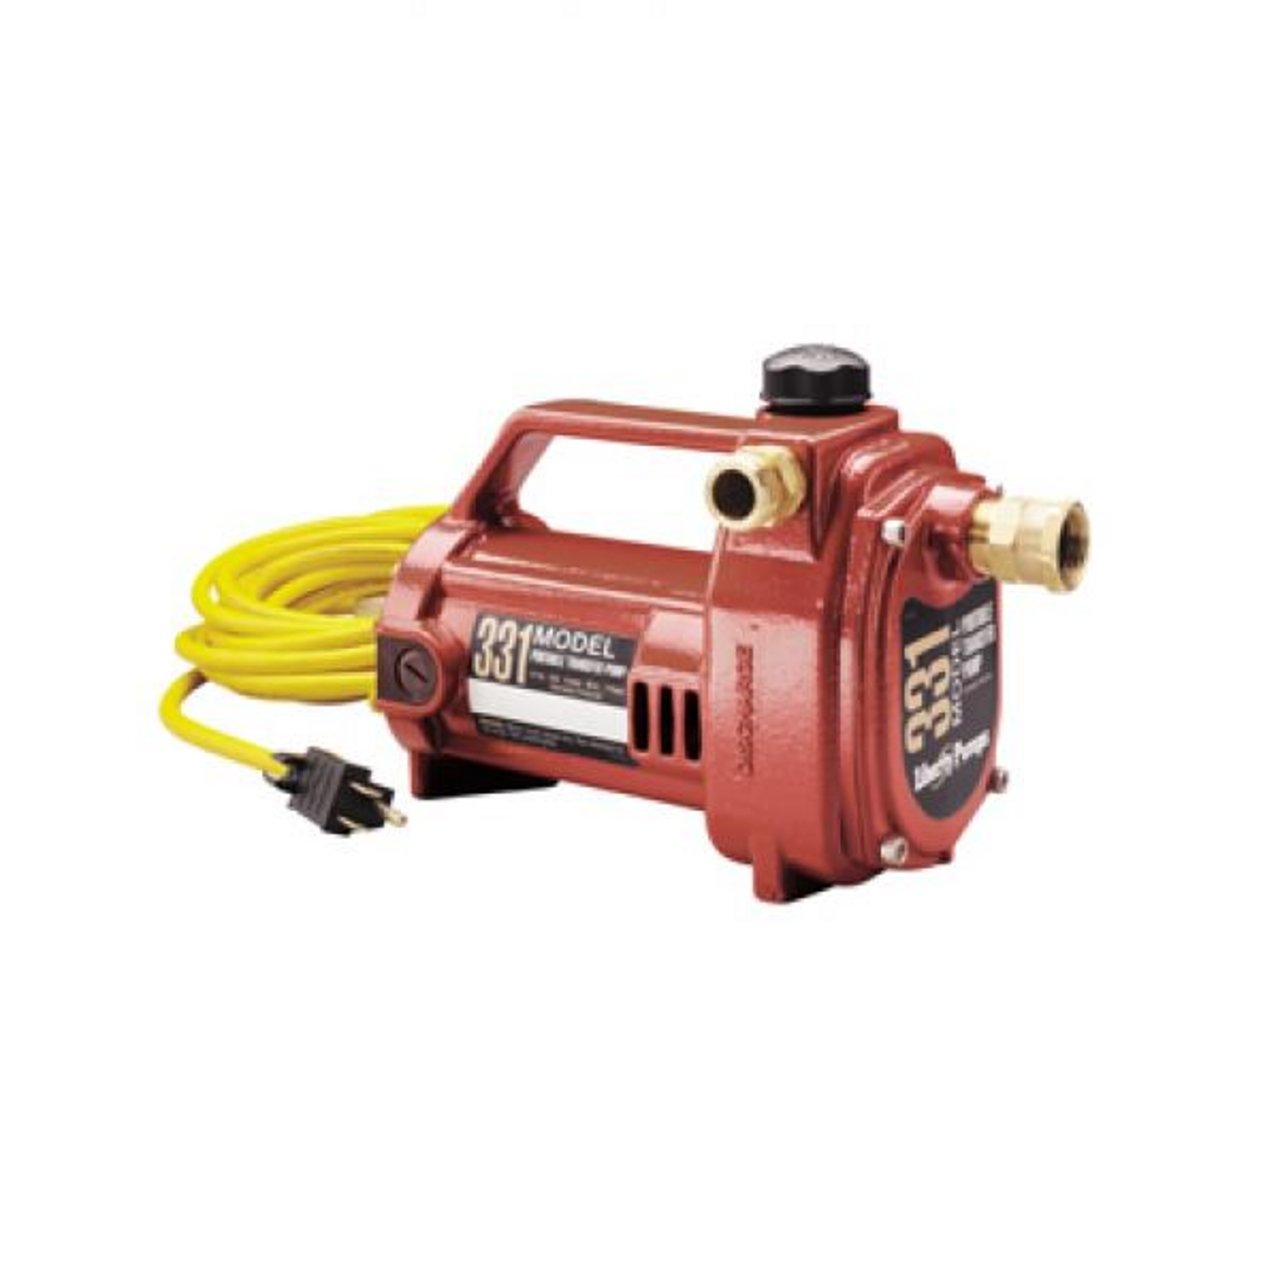 Liberty Pumps 331 Portable Transfer Pump, one-size, RED